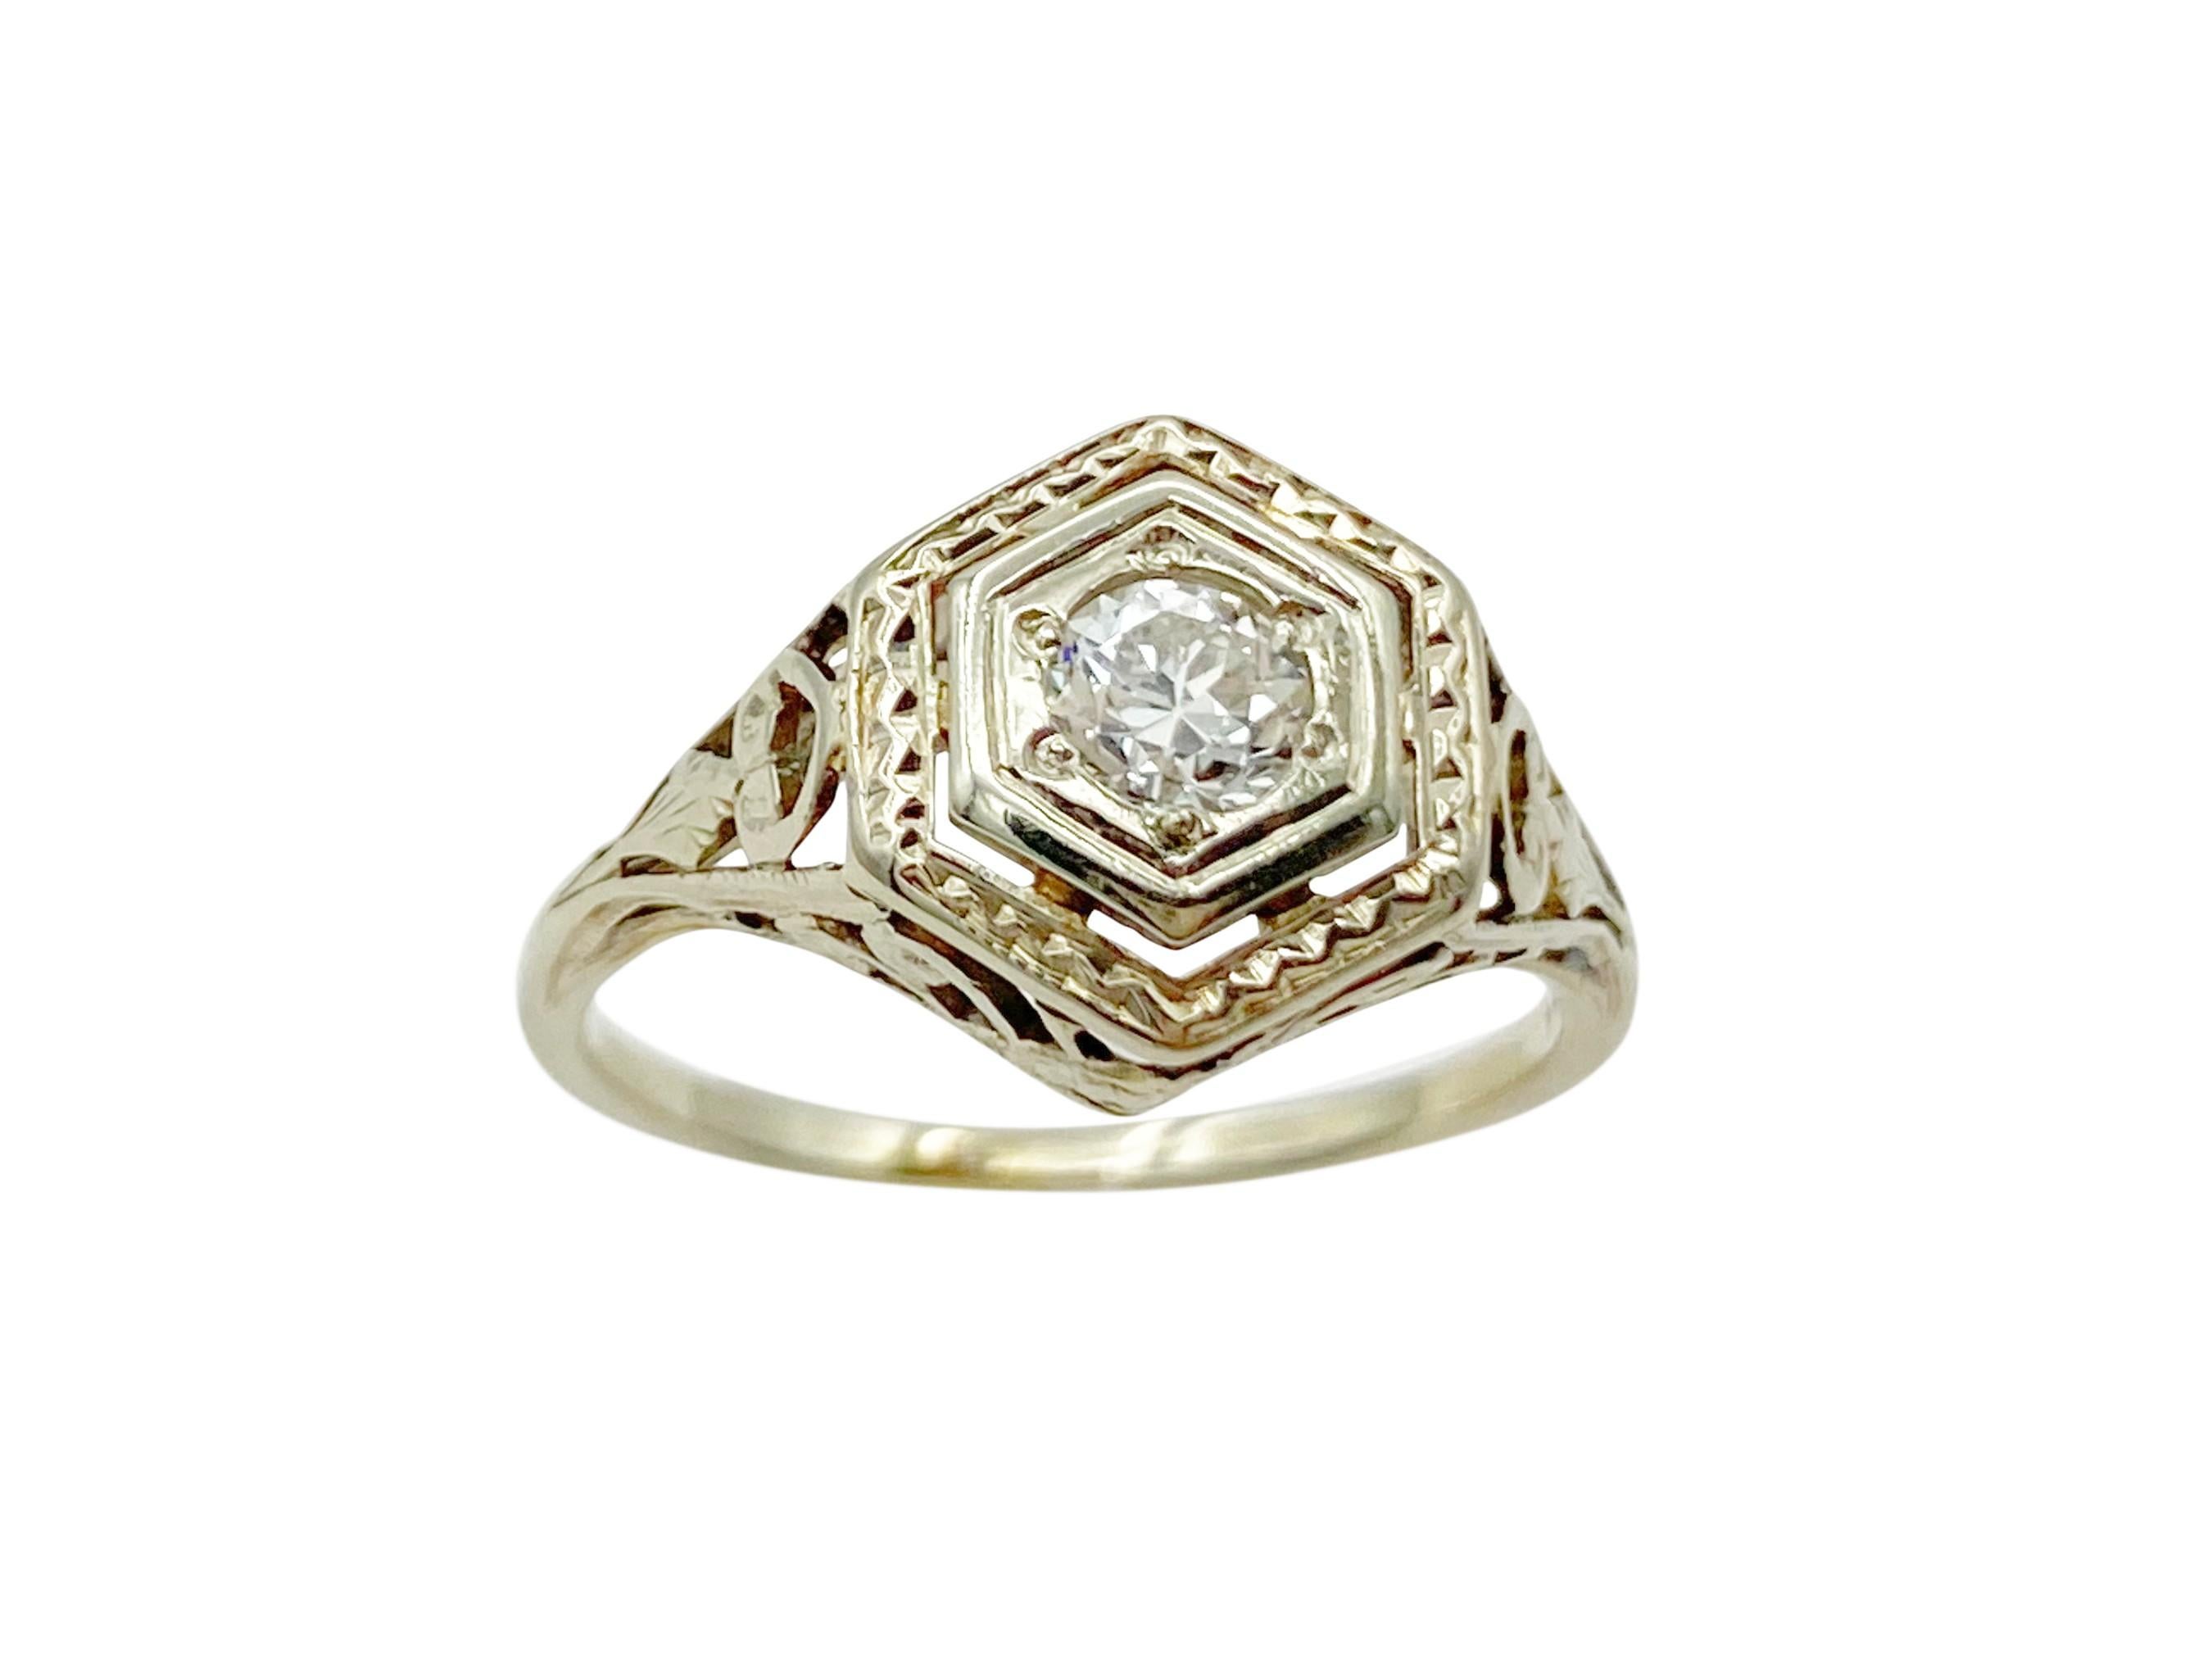 Lovely antique Art Deco ring circa the 1920s. The 14k white gold face has a unique hexagonal shape with a 3.6mm Old European cut white diamond nestled in the center. The hand-worked ring features openwork filigree, milgrain and engraved